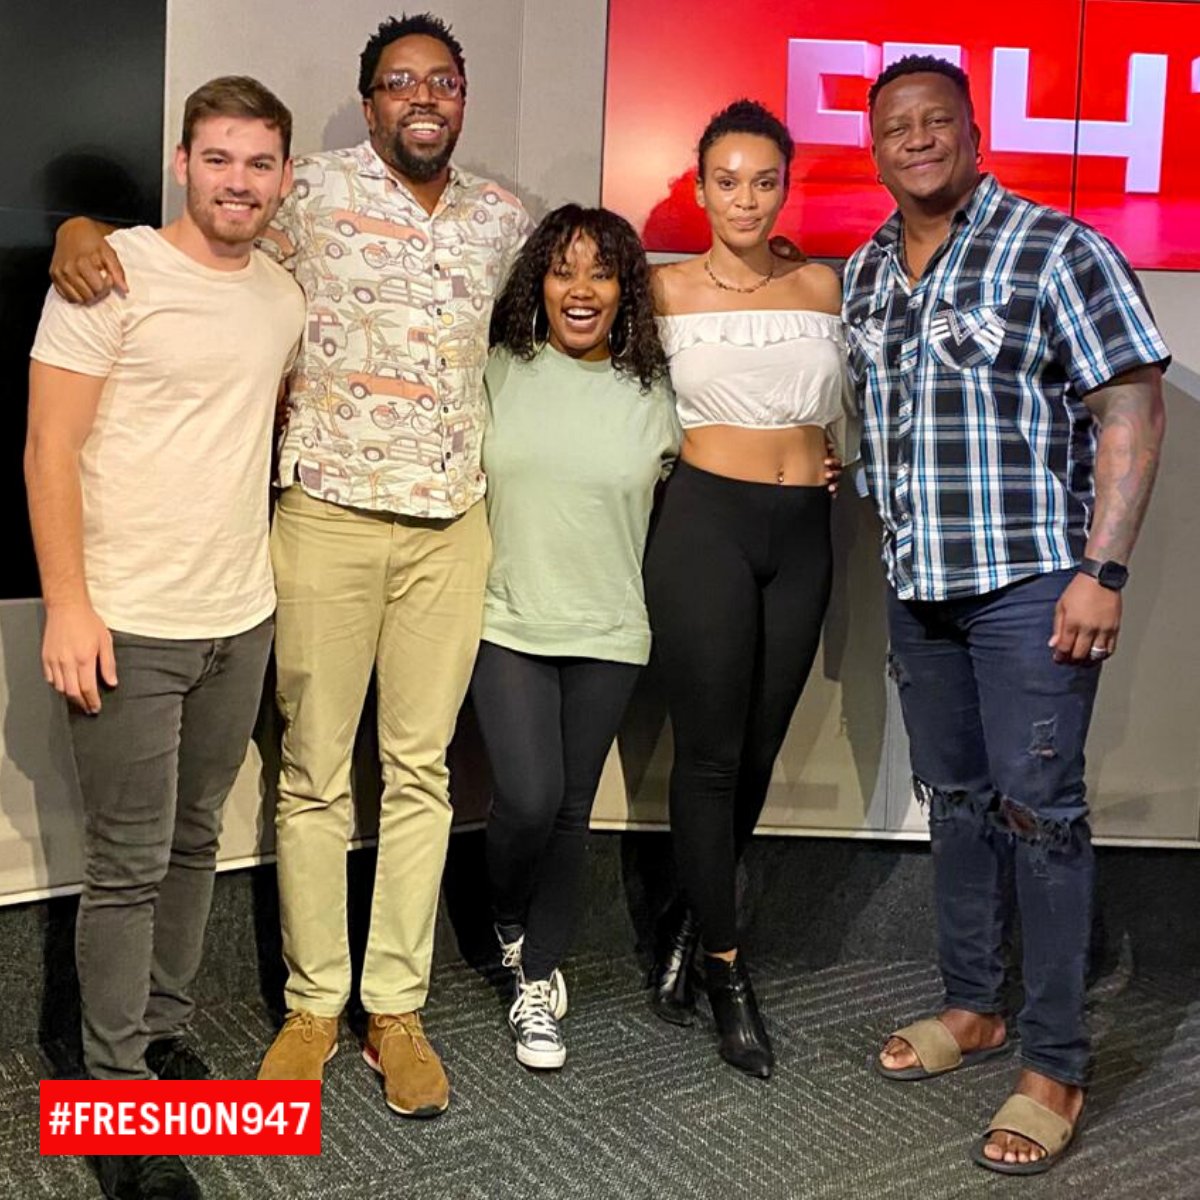 Shoutout to the incredible @PearlThusi and @KagisoLediga for hanging out with #FreshOn947😁 Catch #QueenSONO's first episode on 28 February on @NetflixSA! Here's what you need to know about the exciting new show: bit.ly/3c5ELHt